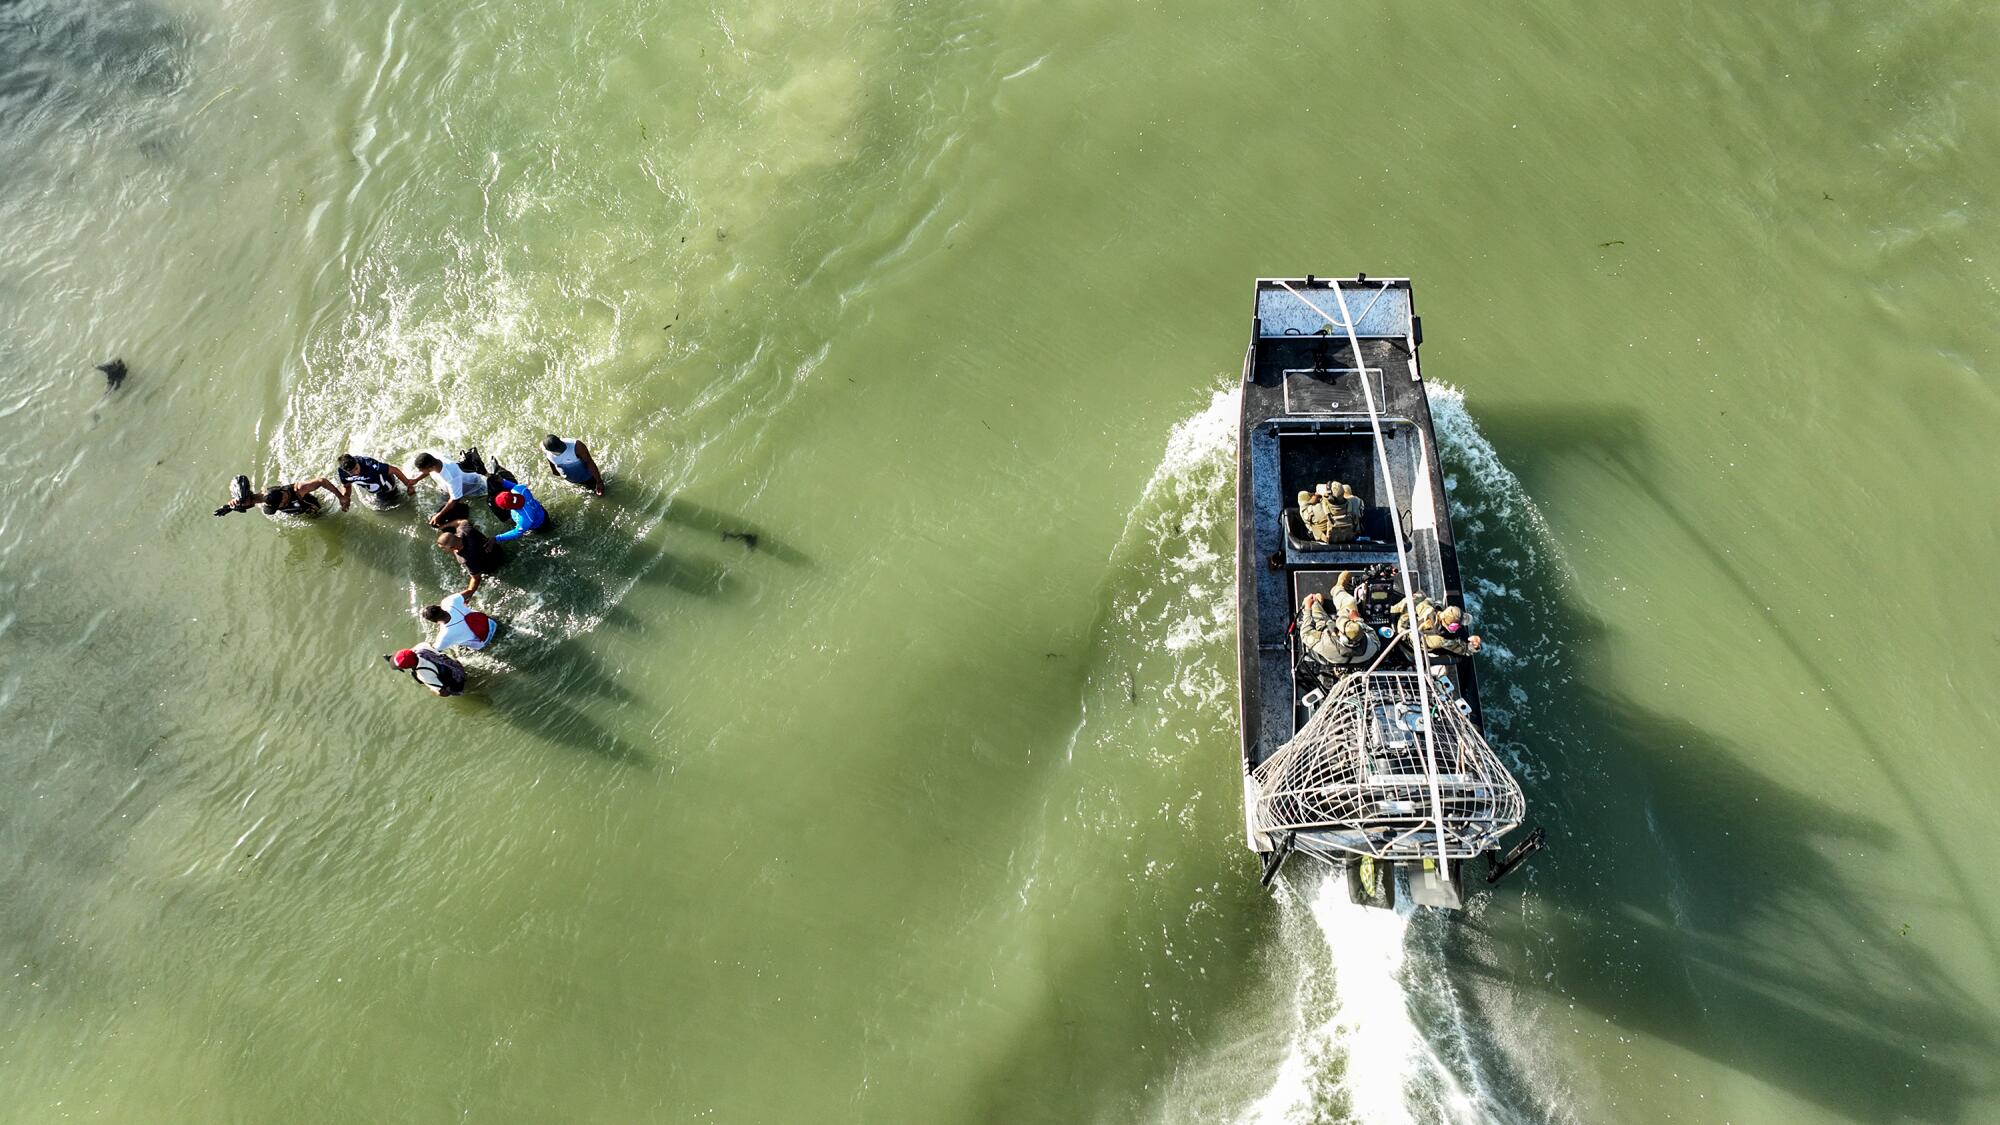 An aerial view of a Border Patrol vessel pulling beside a group of people wading through the Rio Grande's murky green water